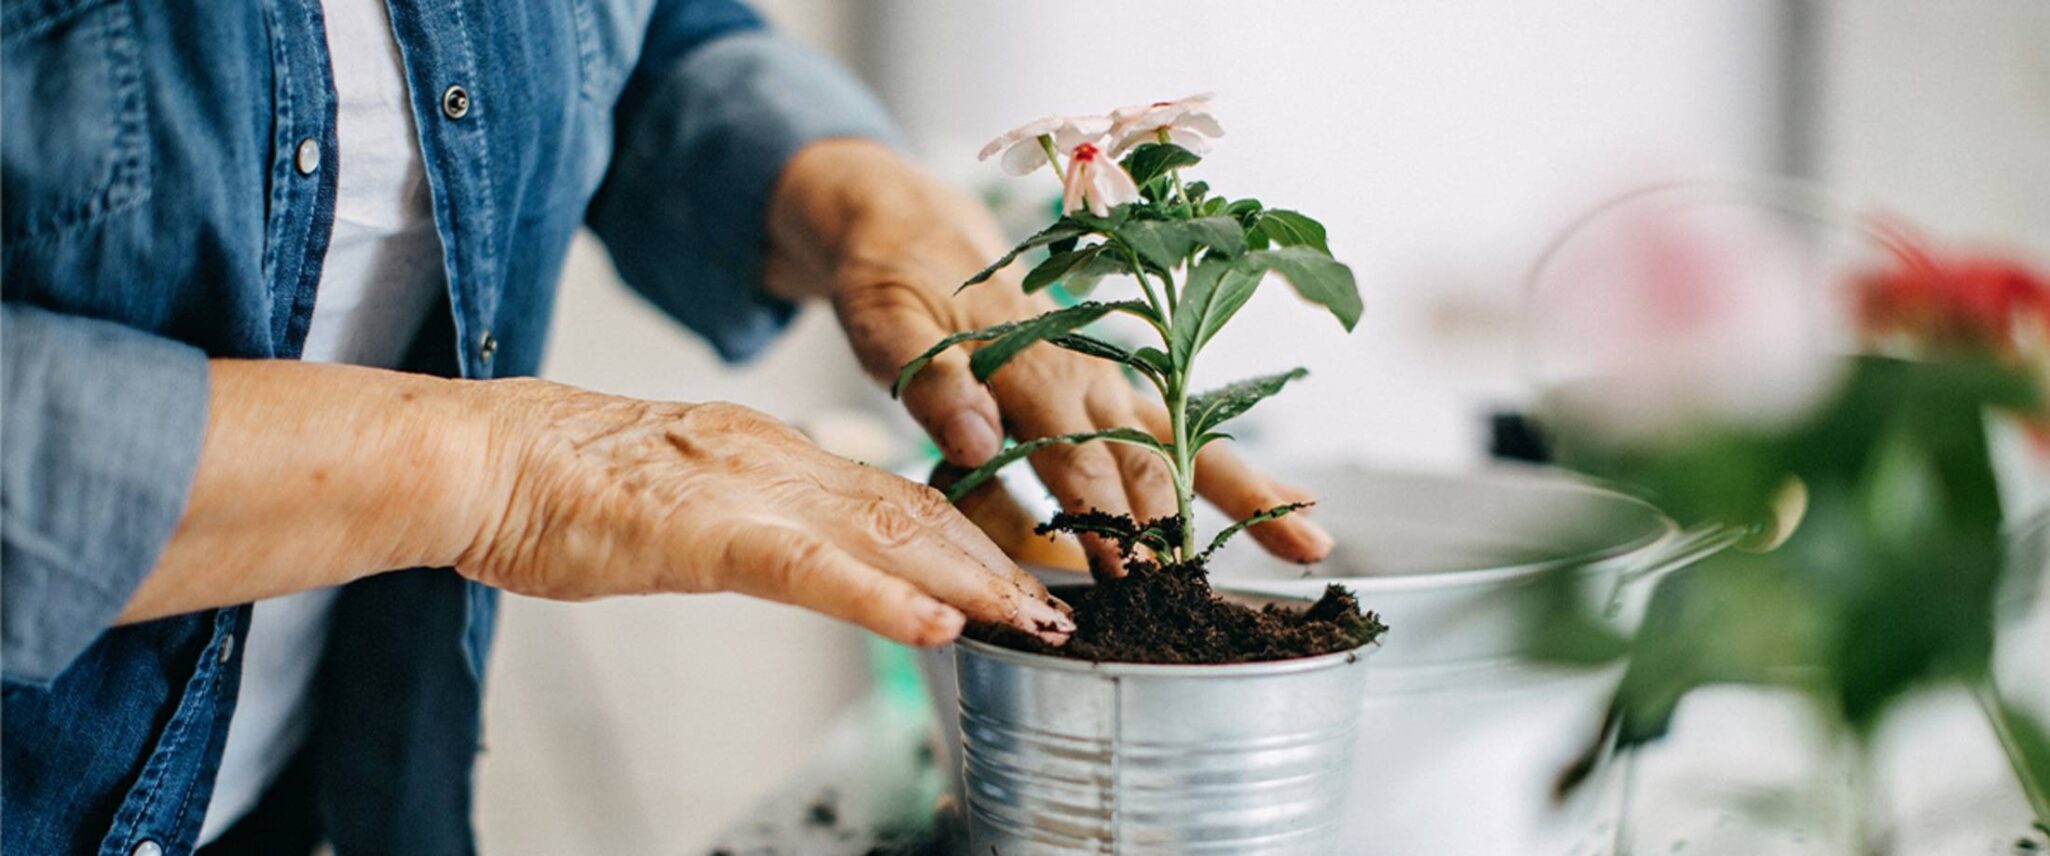 senior planting a small flower plant into a silver pot